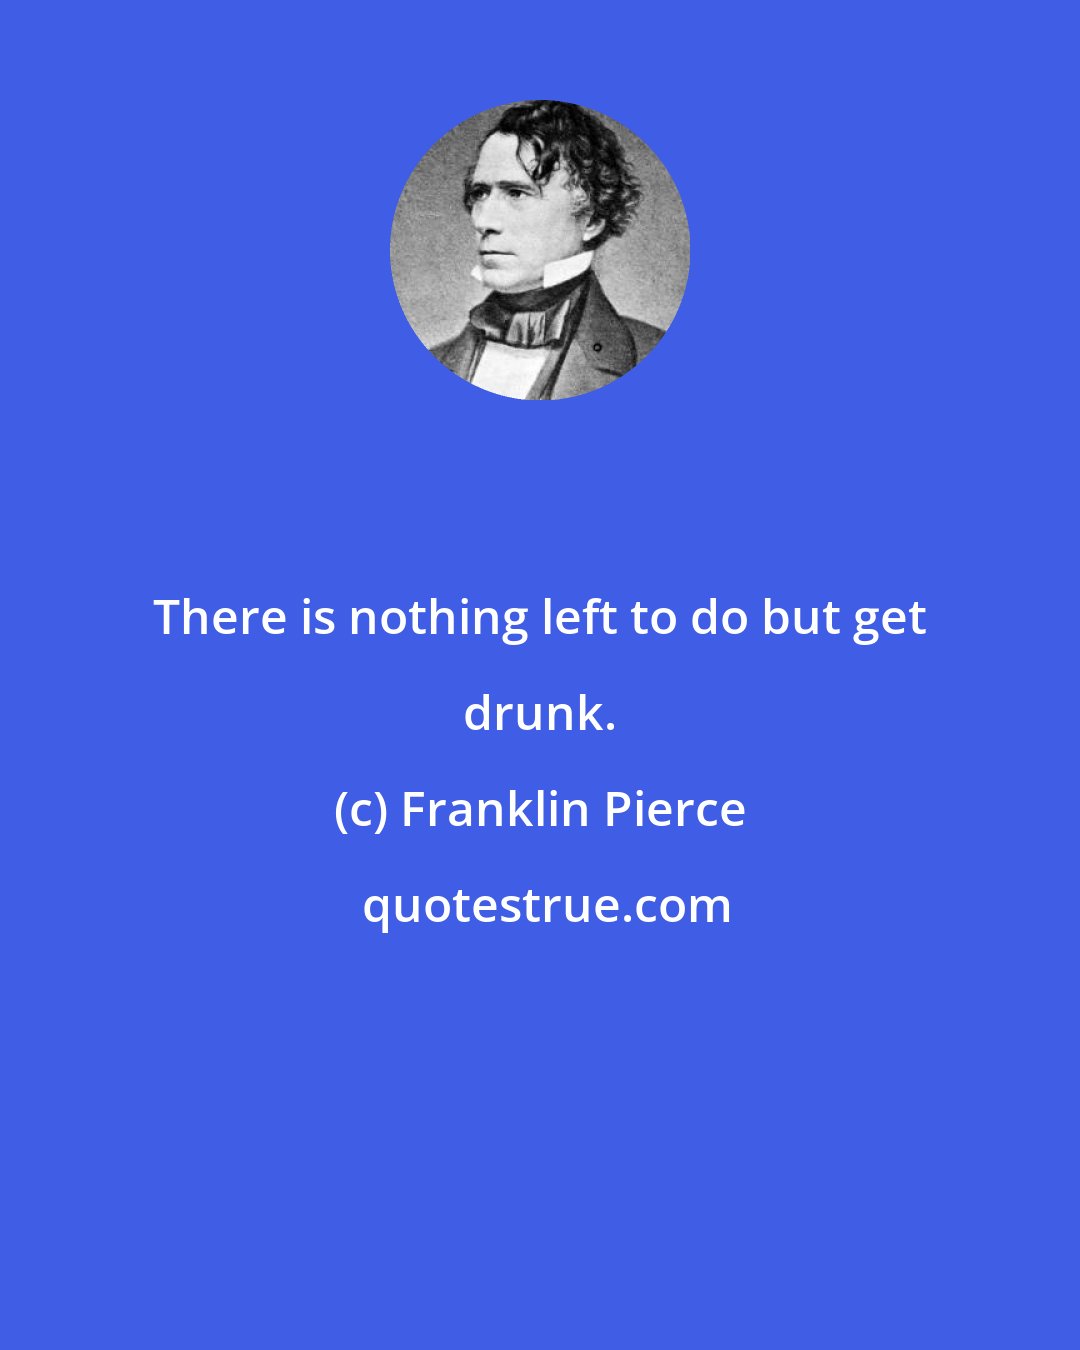 Franklin Pierce: There is nothing left to do but get drunk.